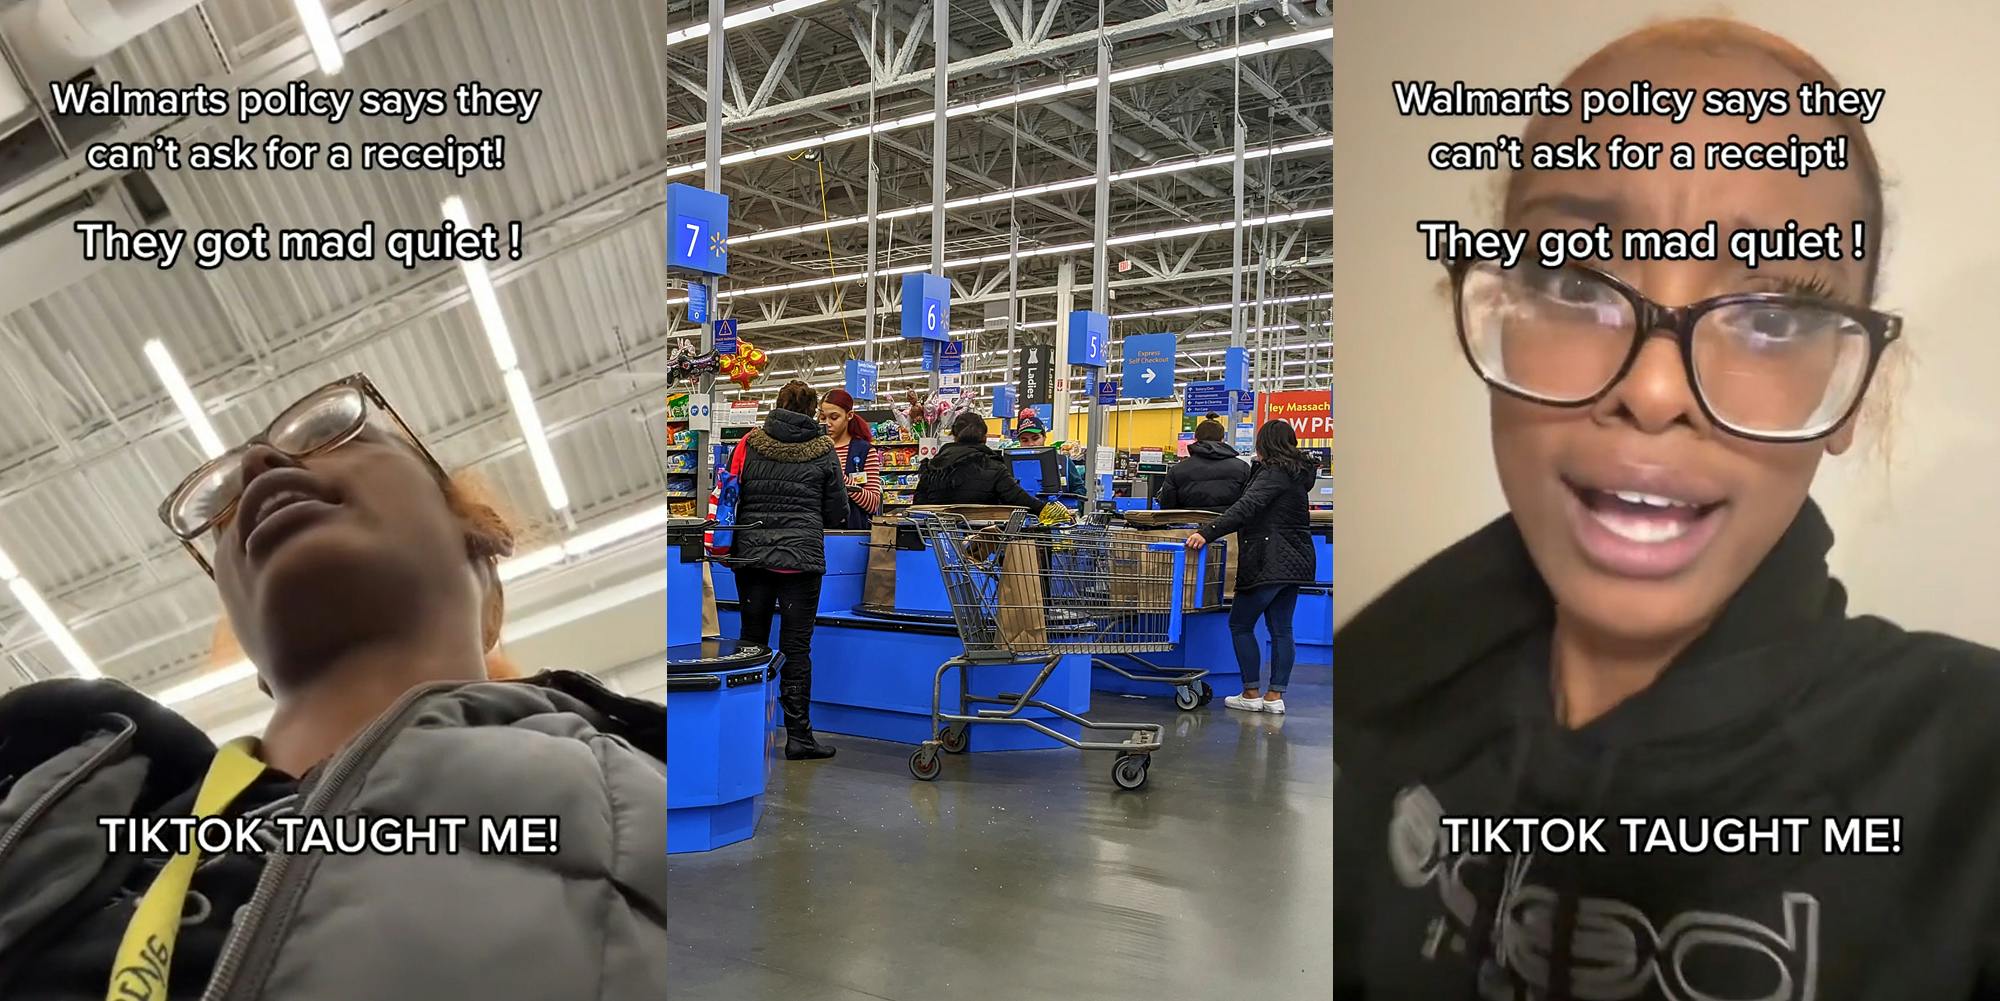 woman speaking in Walmart with caption "Walmarts policy says they can't ask for a receipt! They got mad quiet! TIKTOK TAUGHT ME!" (l) Walmart checkout with workers and customers (c) woman speaking with caption "Walmarts policy says they can't ask for a receipt! They got mad quiet! TIKTOK TAUGHT ME!" (r)